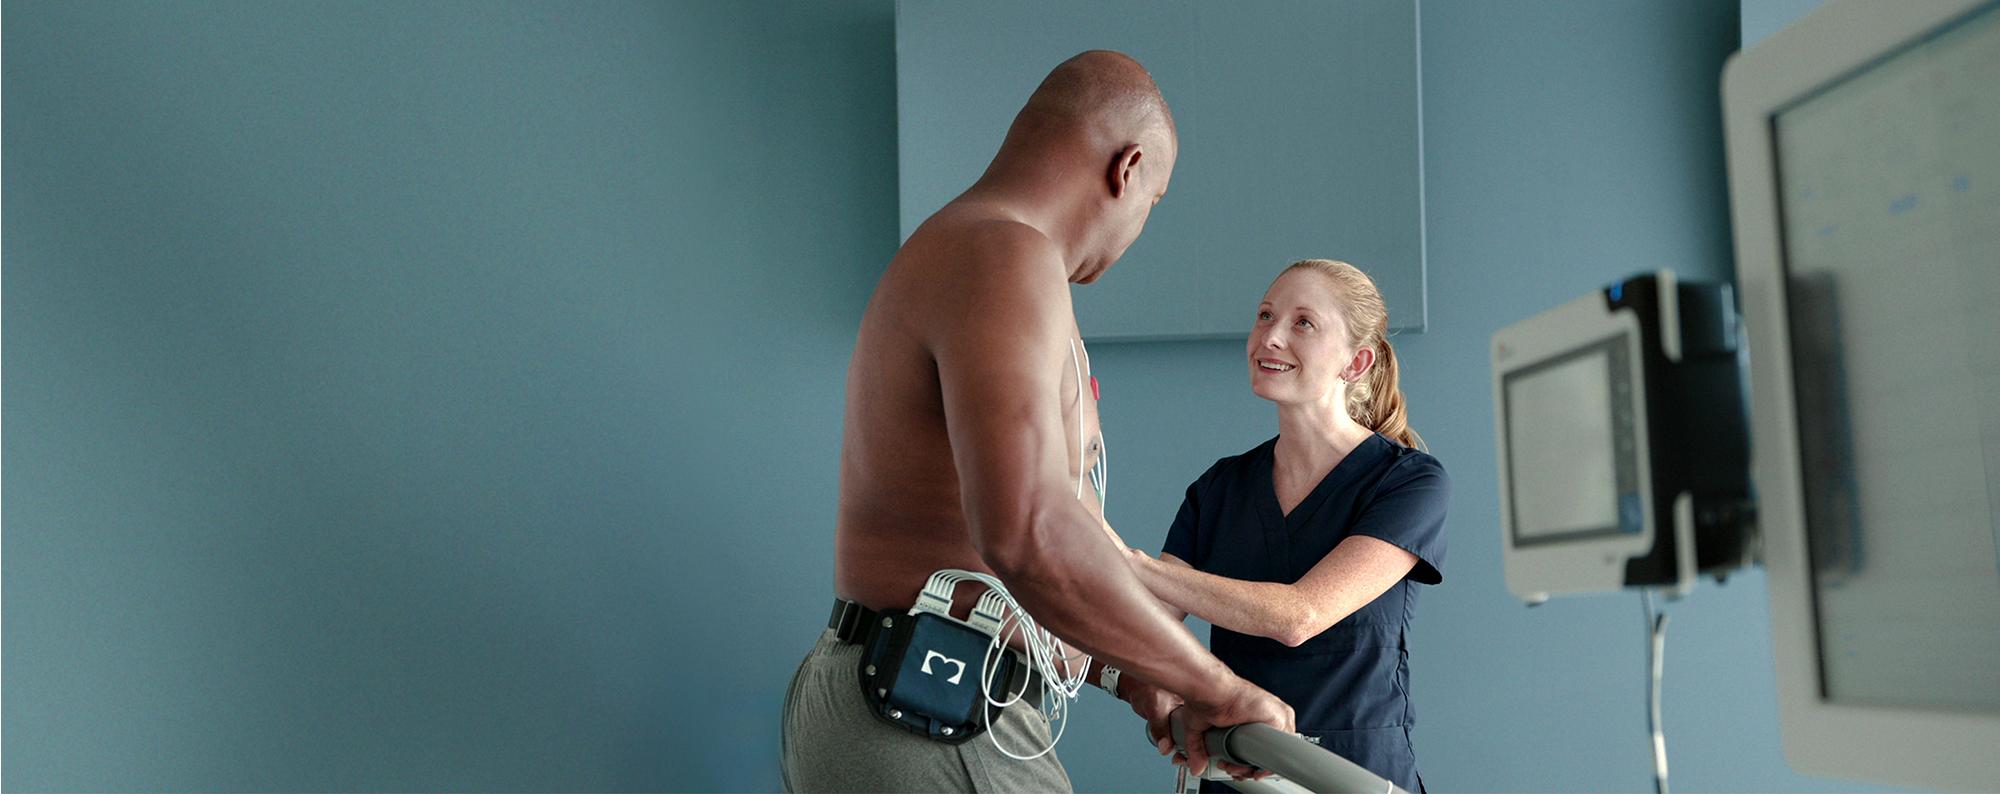 Patient on a treadmill connected to the Welch Allyn Q-Stress Cardiac Stress Testing System via the Wireless Acquisition Module